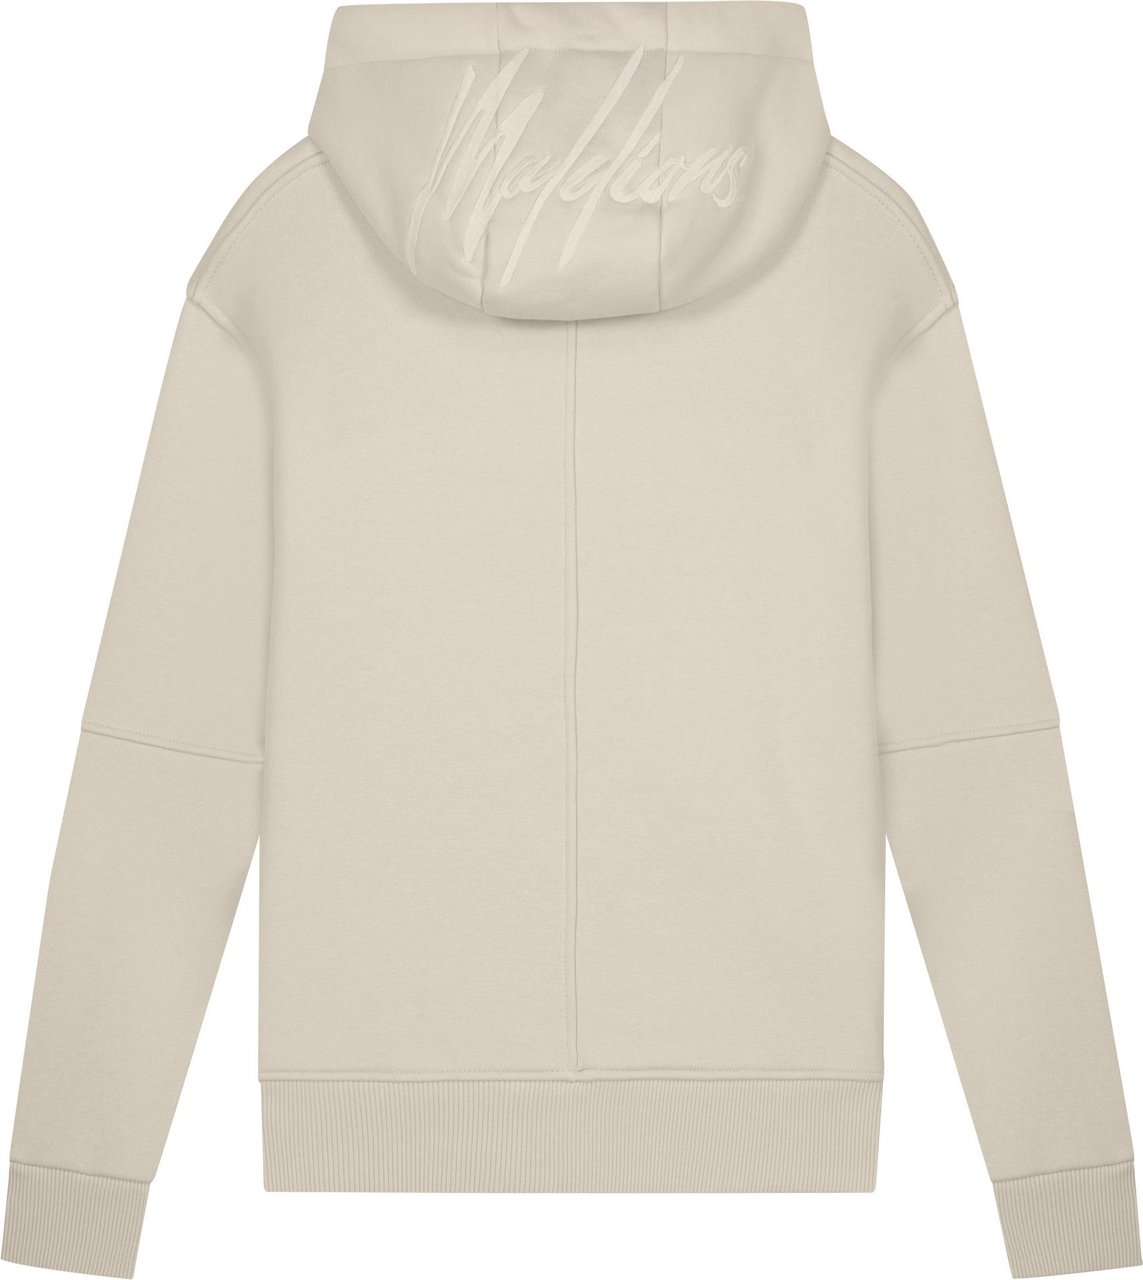 Malelions Essentials Hoodie - Taupe Taupe